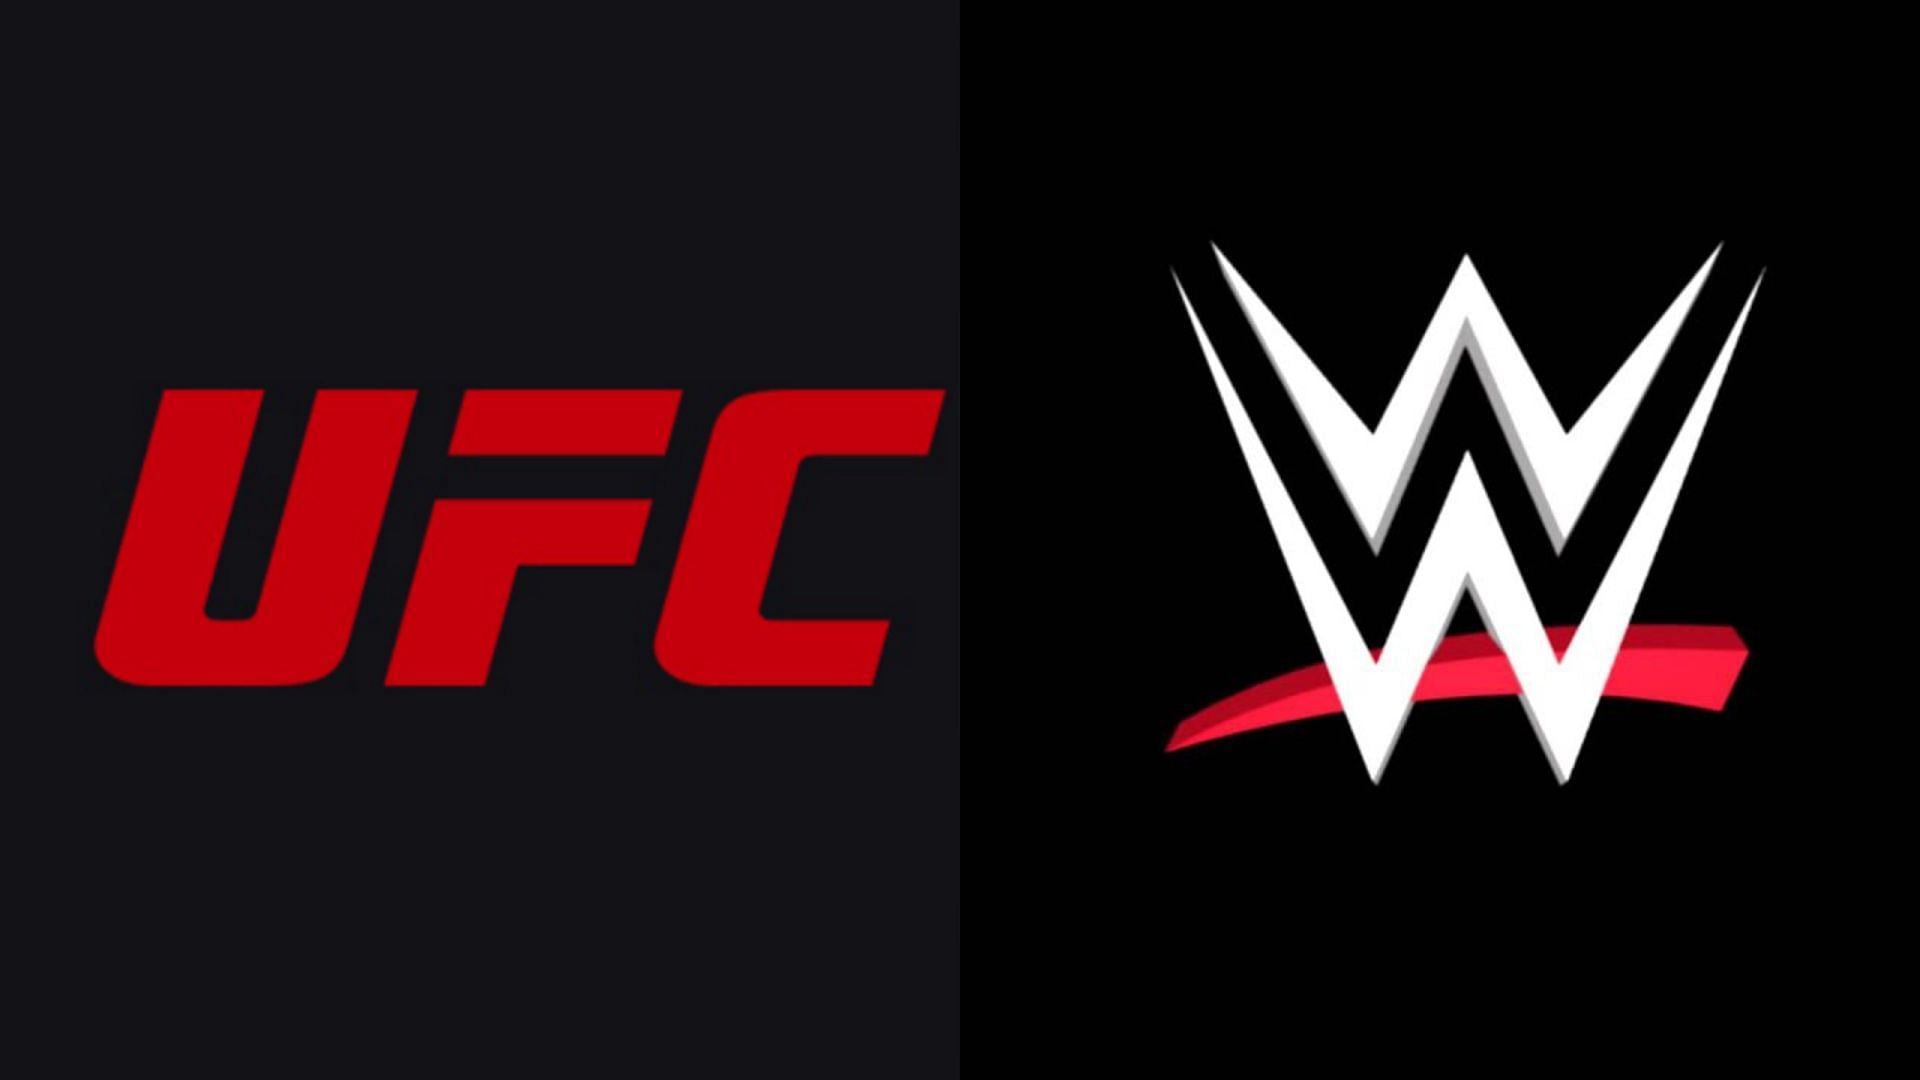 WWE and UFC are likely going to merge by the end of this year